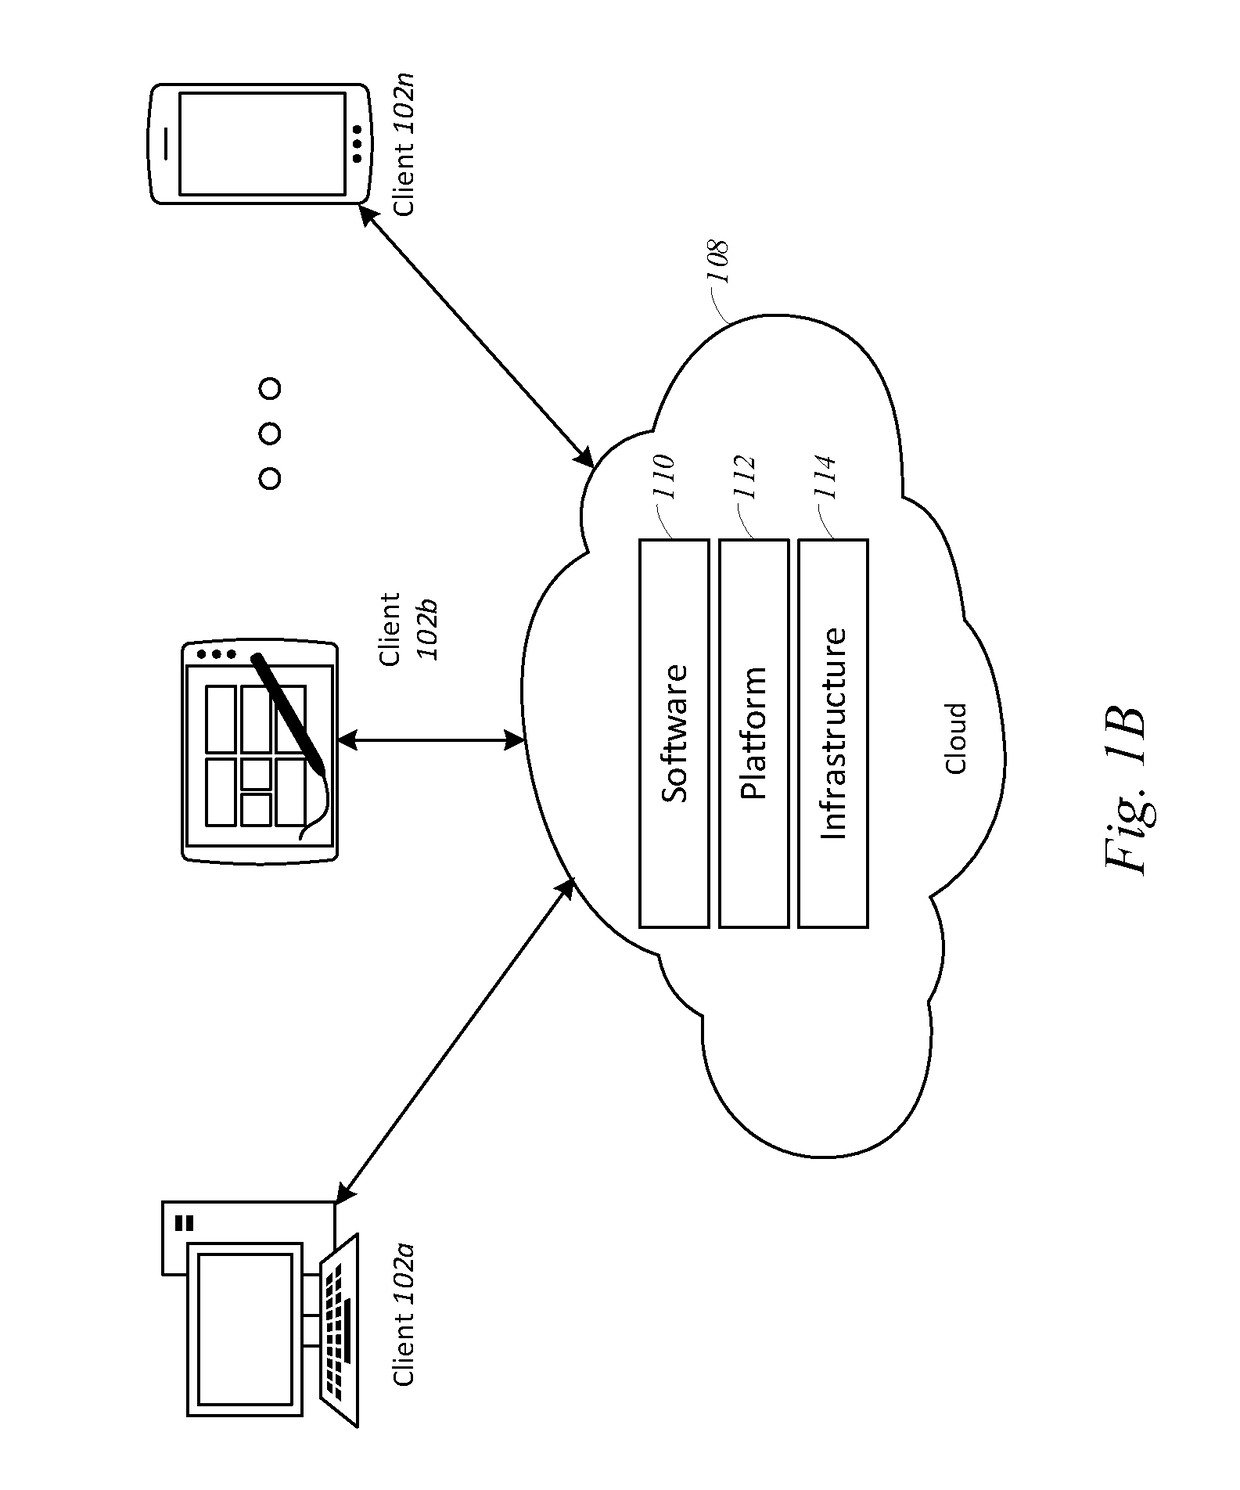 System and methods for reverse vishing and point of failure remedial training